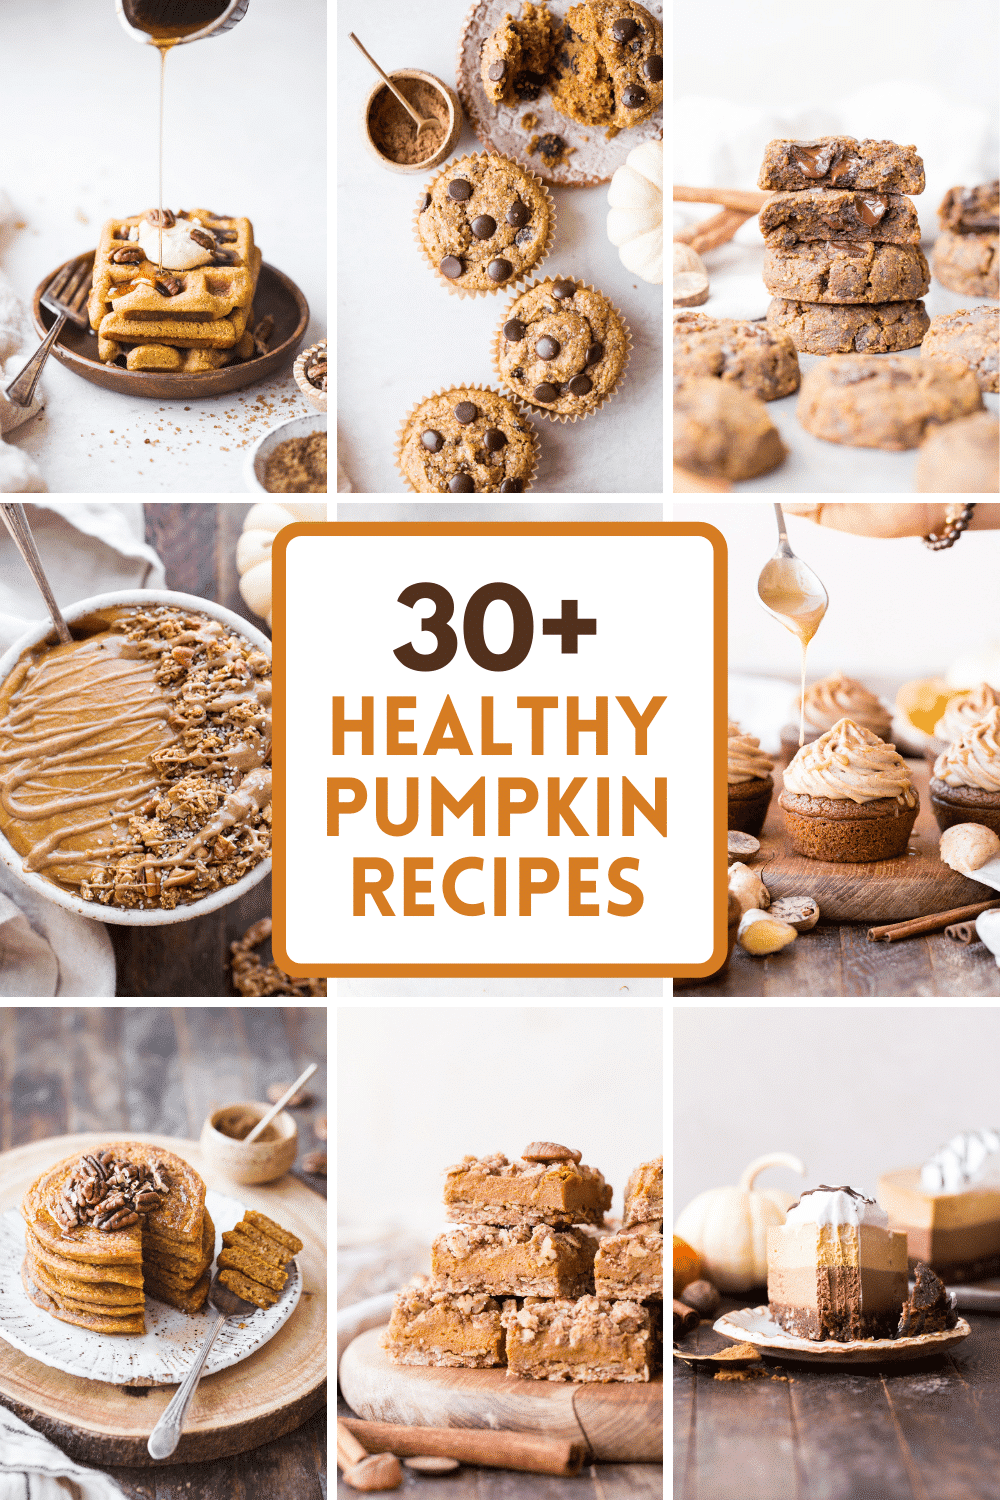 Text of "30+ Healthy Pumpkin Recipes" in the center, surrounded by photos of (from top left clockwise) pumpkin waffles, pumpkin muffins, pumpkin cookies, pumpkin spice chai cupcakes, pumpkin chocolate vegan cheesecake, pumpkin pie crumb bars, pumpkin pancakes, and a pumpkin spice smoothie bowl.